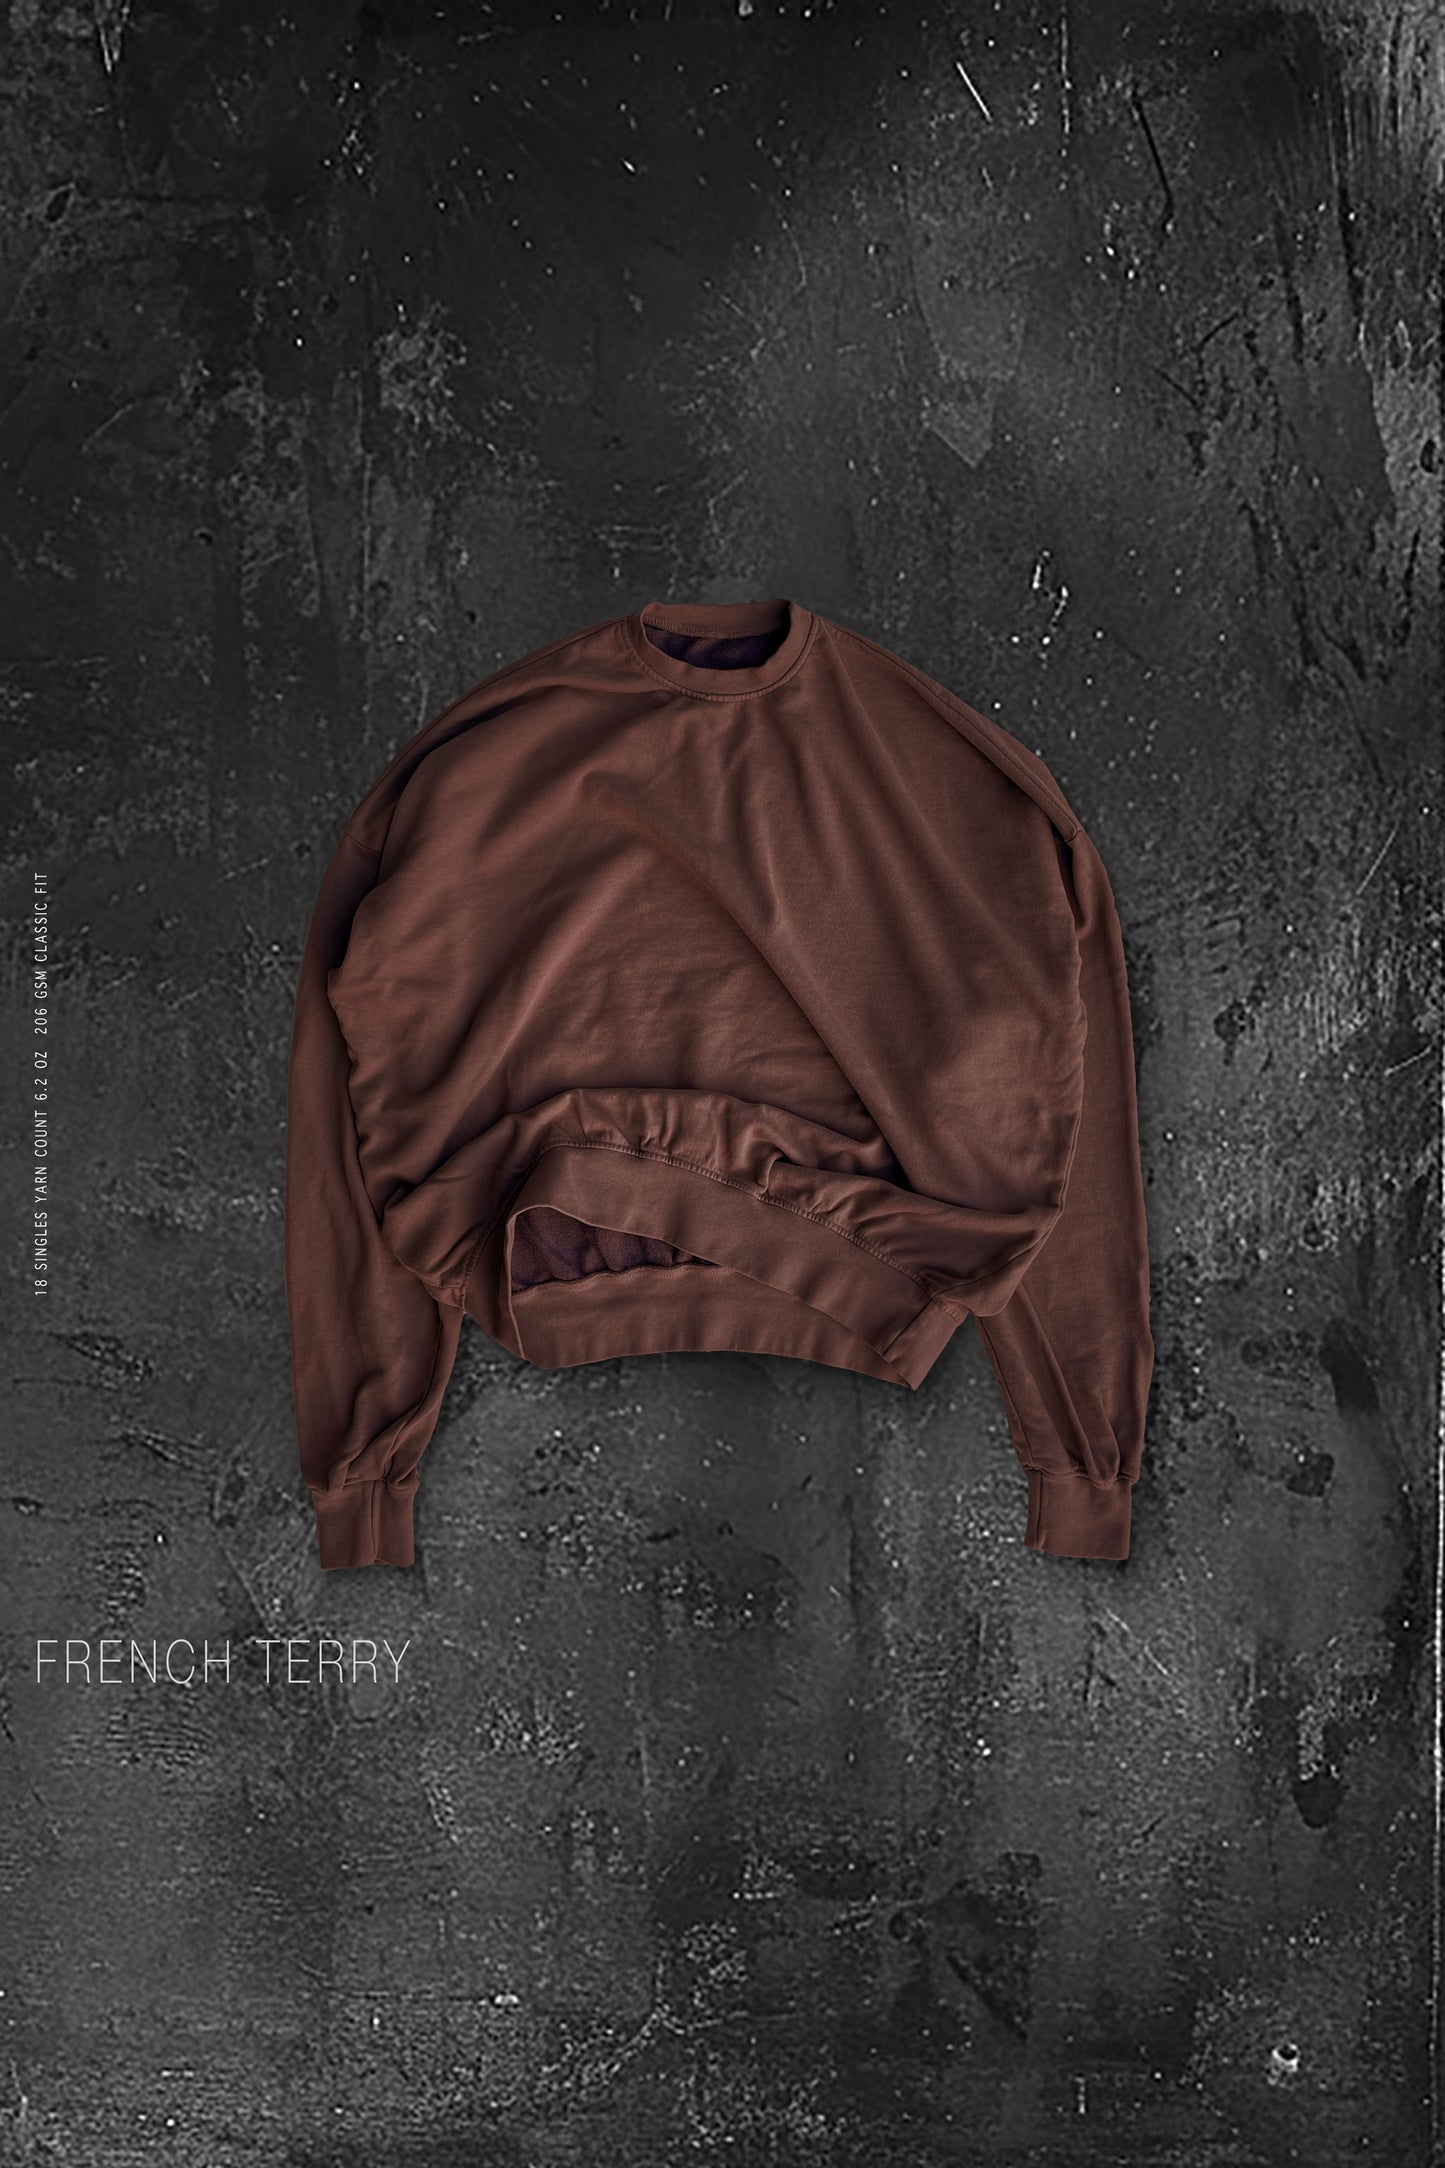 ⭐️ New OVERSIZED FRENCH TERRY Unisex Limited edition